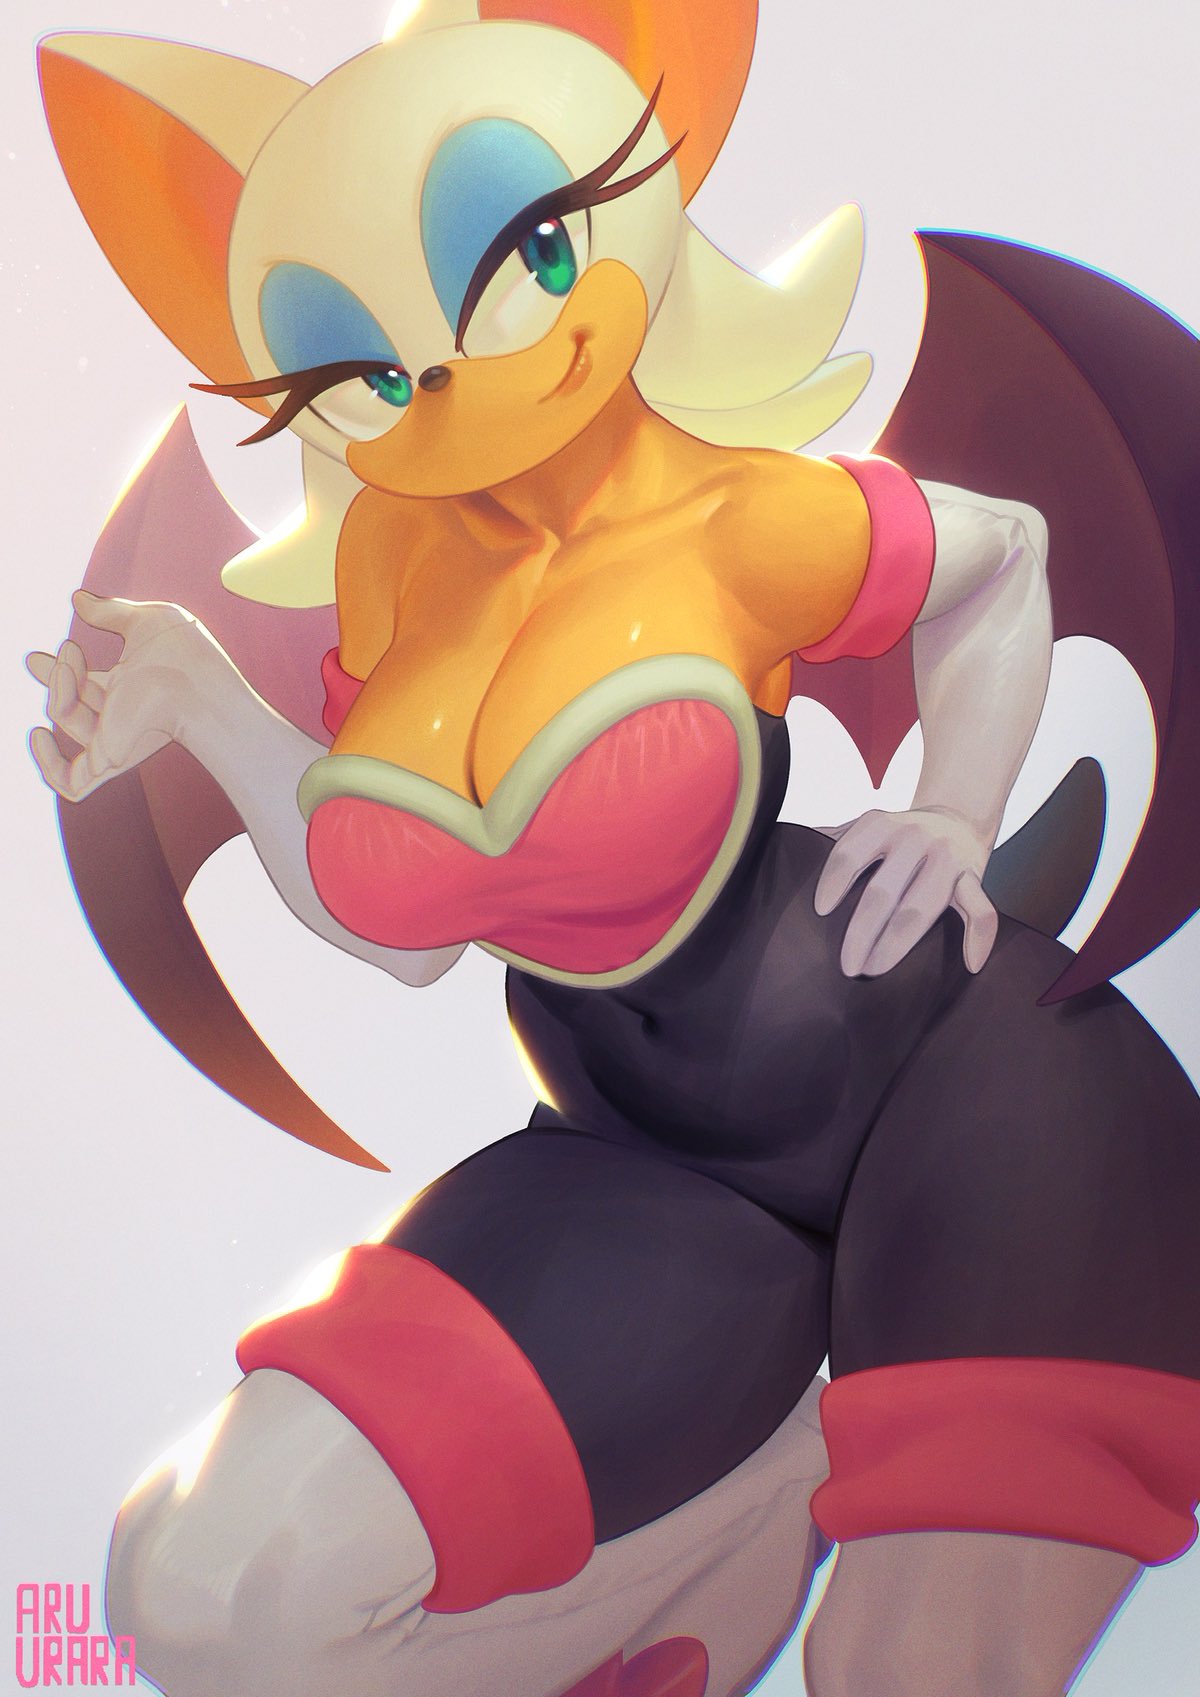 Anime 1200x1697 Rouge the Bat Sonic the Hedgehog green eyes furry girls Anthro video game girls video game characters white background cleavage big boobs portrait display wings elbow gloves aruurara